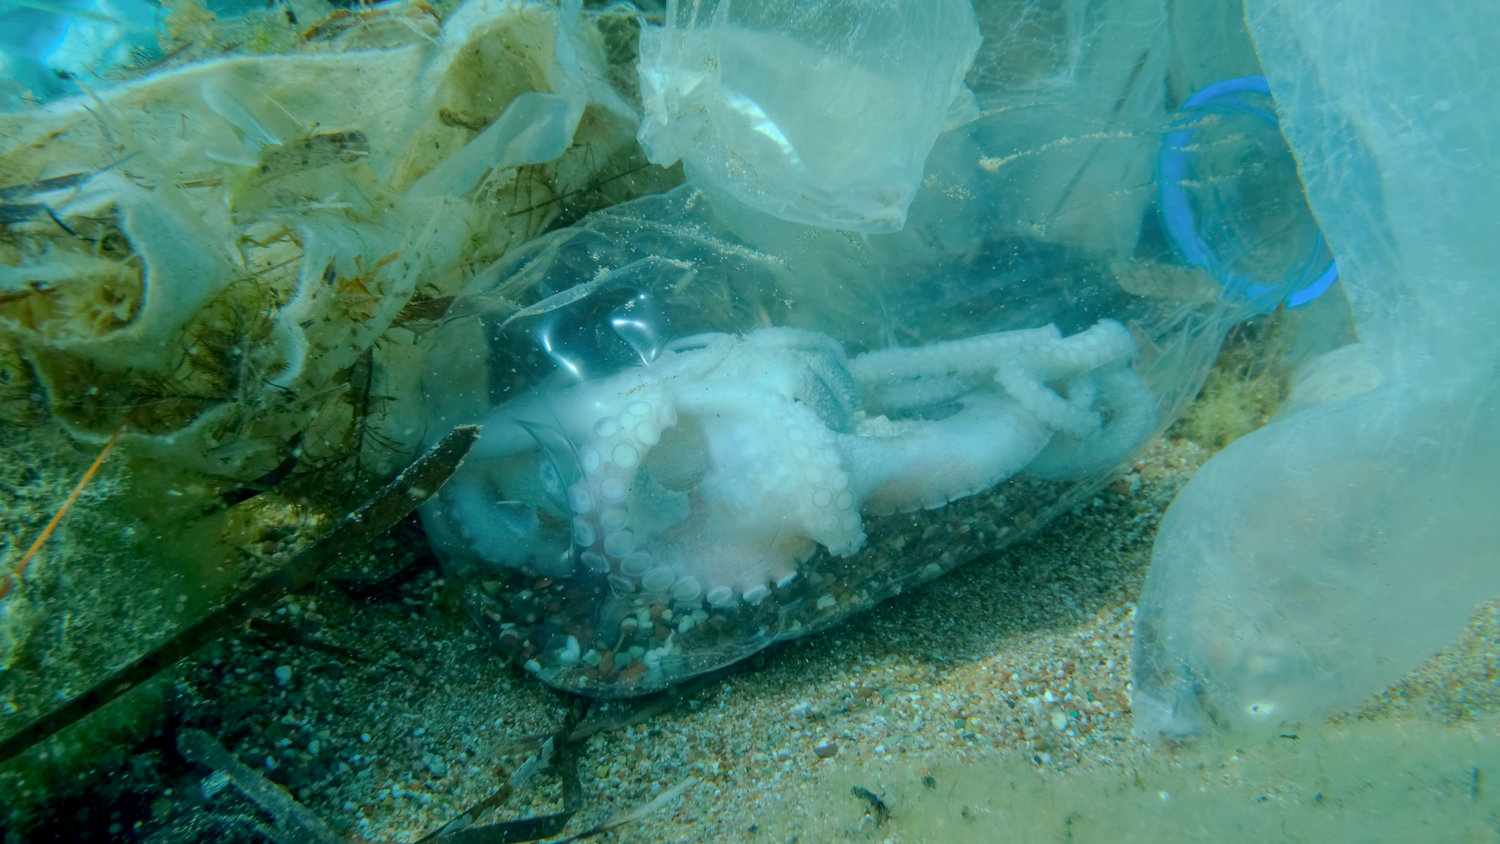 Dead octopus inside a plastic bottle on the seabed among plastic bags and other garbage. COVID-19 is contributing to pollution, as discarded used masks clutter polluting sea bottom along with plastic trash.